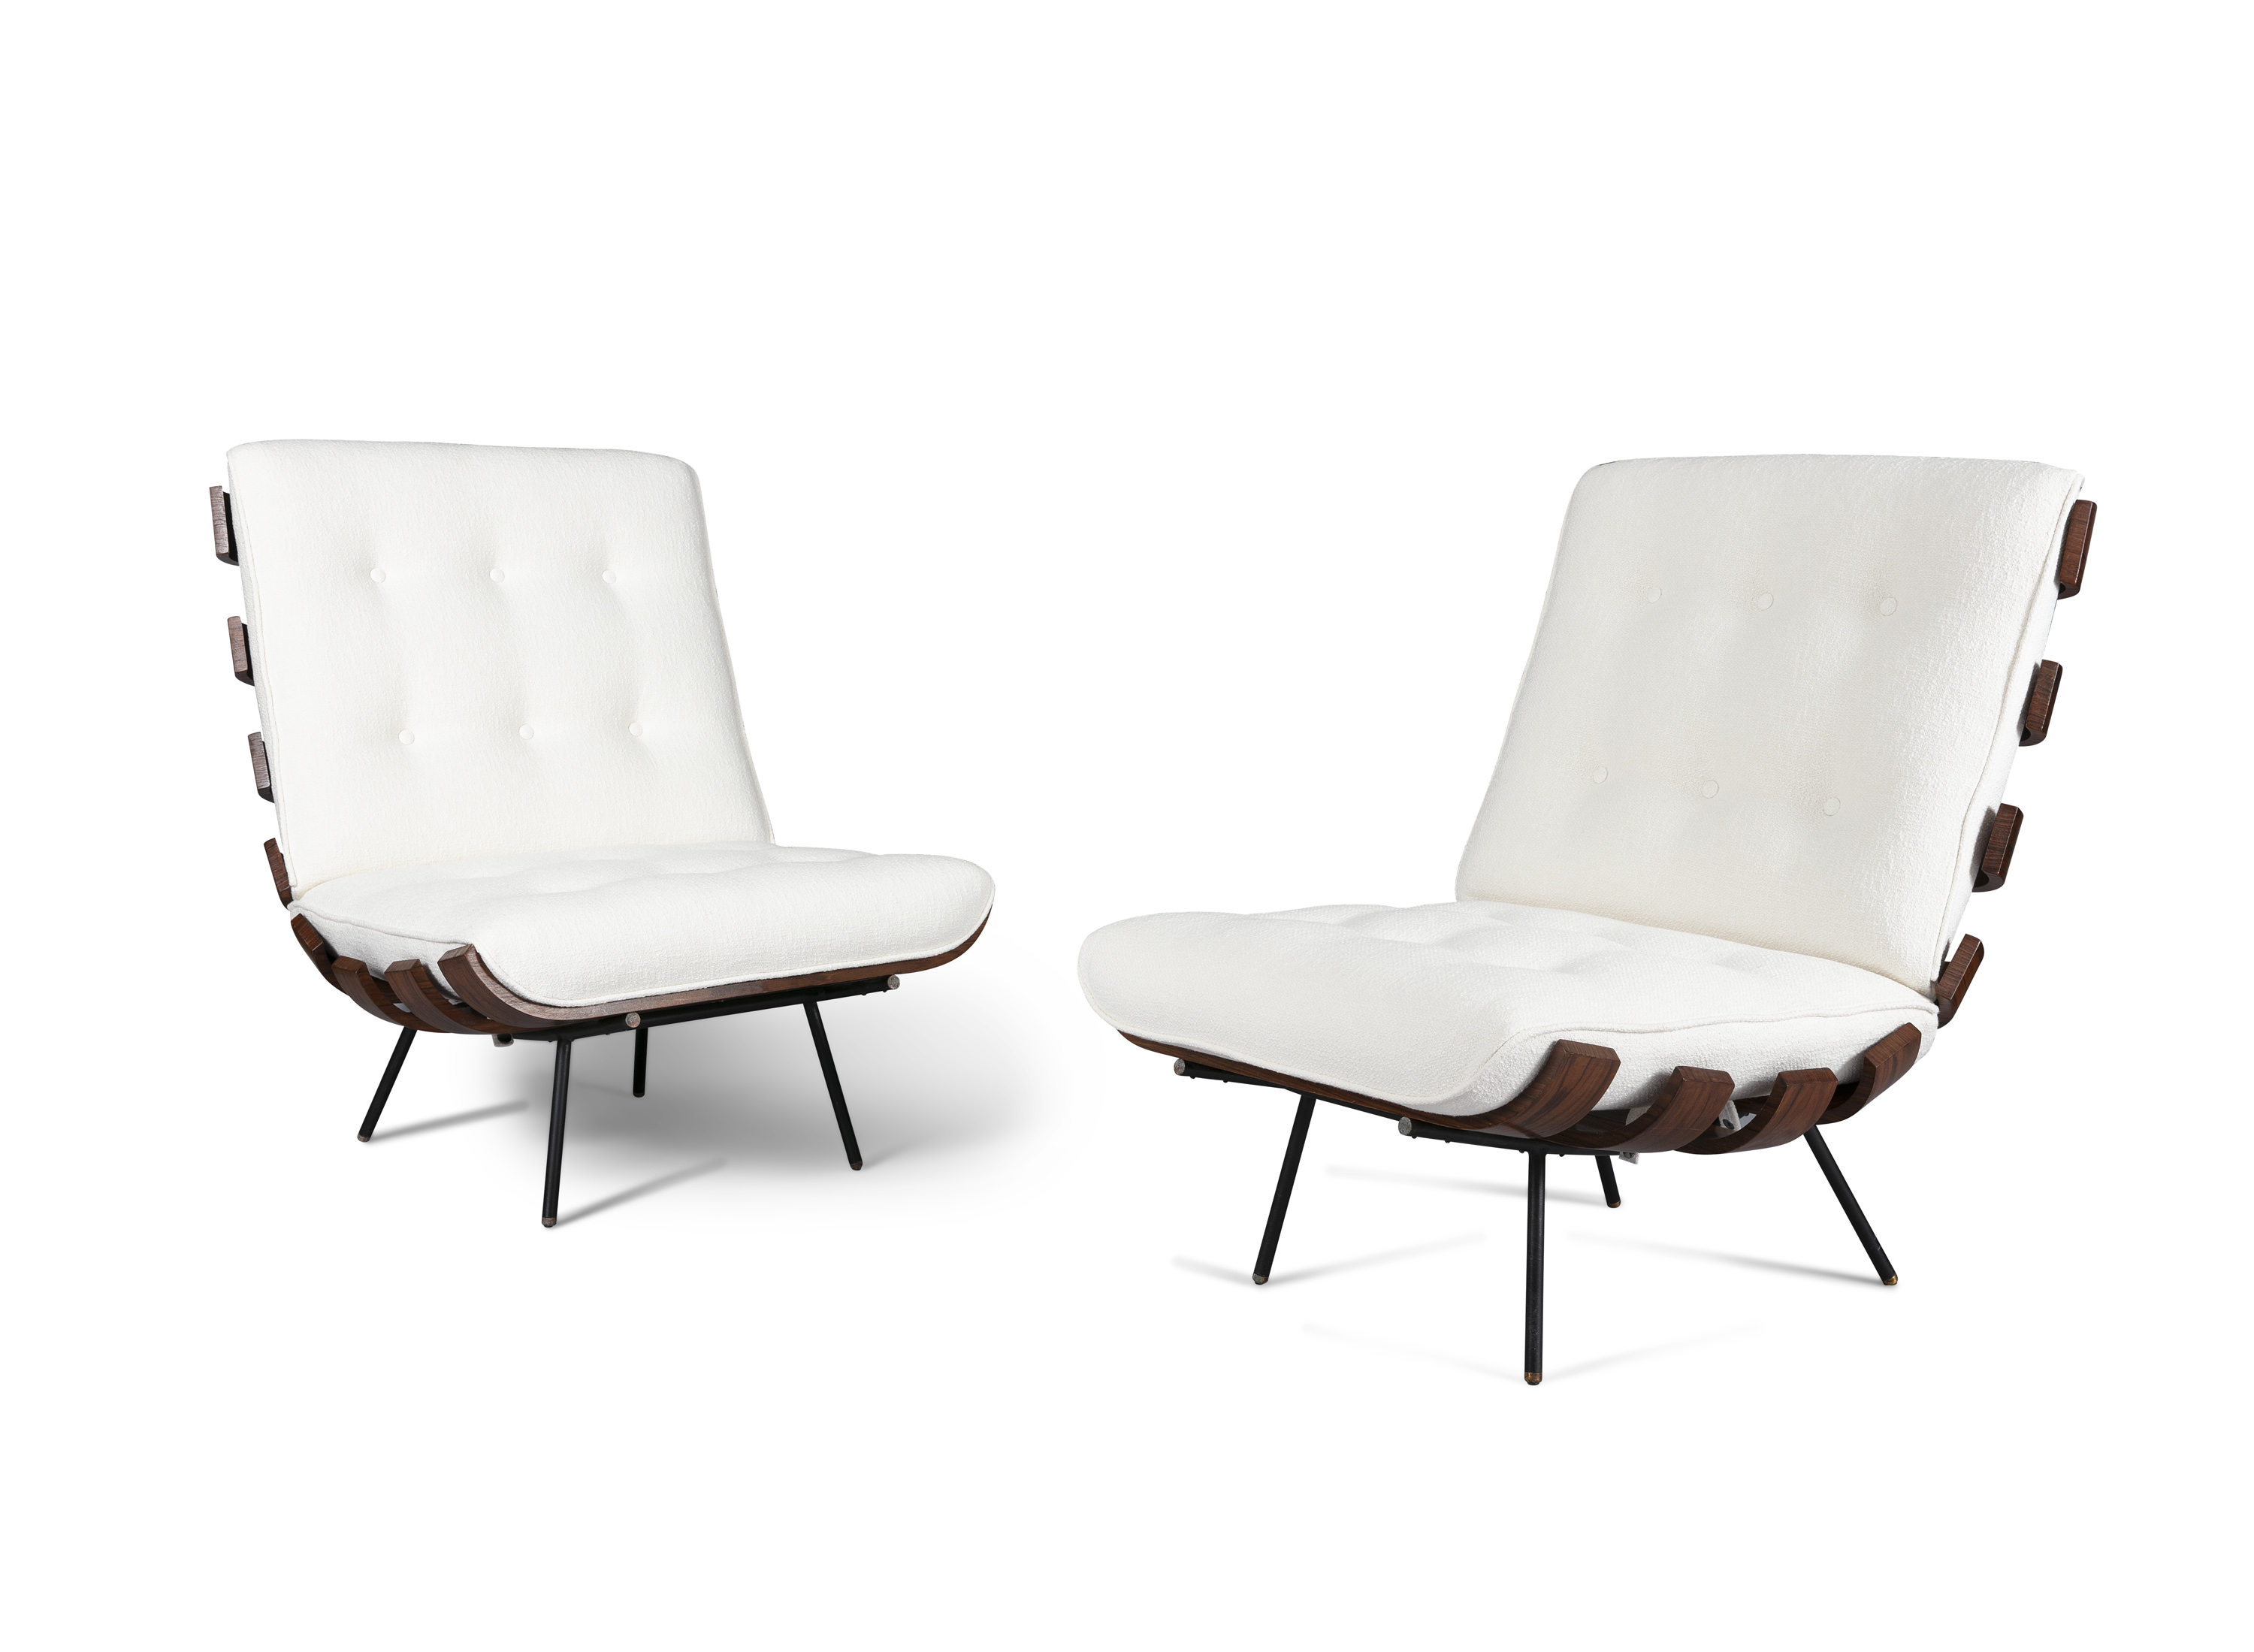 COSTELA 'RIB' CHAIRS A pair of Costela 'Rib' chairs by Martin Eisler and Carlo Hauner, in